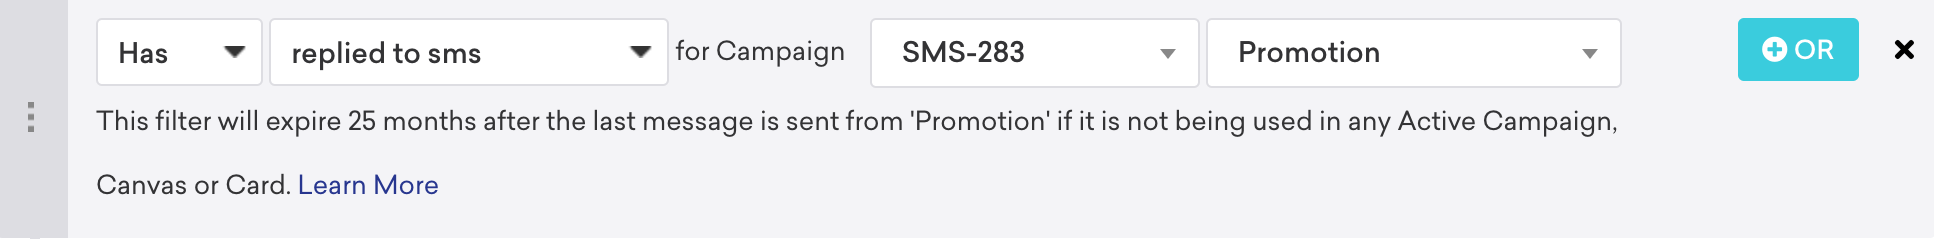 Campaign with the filter "Has replied to SMS" for campaign "SMS-283" "Promotion". Under the filter the feature mentions "This filter will expire 25 months after the last message is sent from "Promotion" if it is not being used in any active campaign."